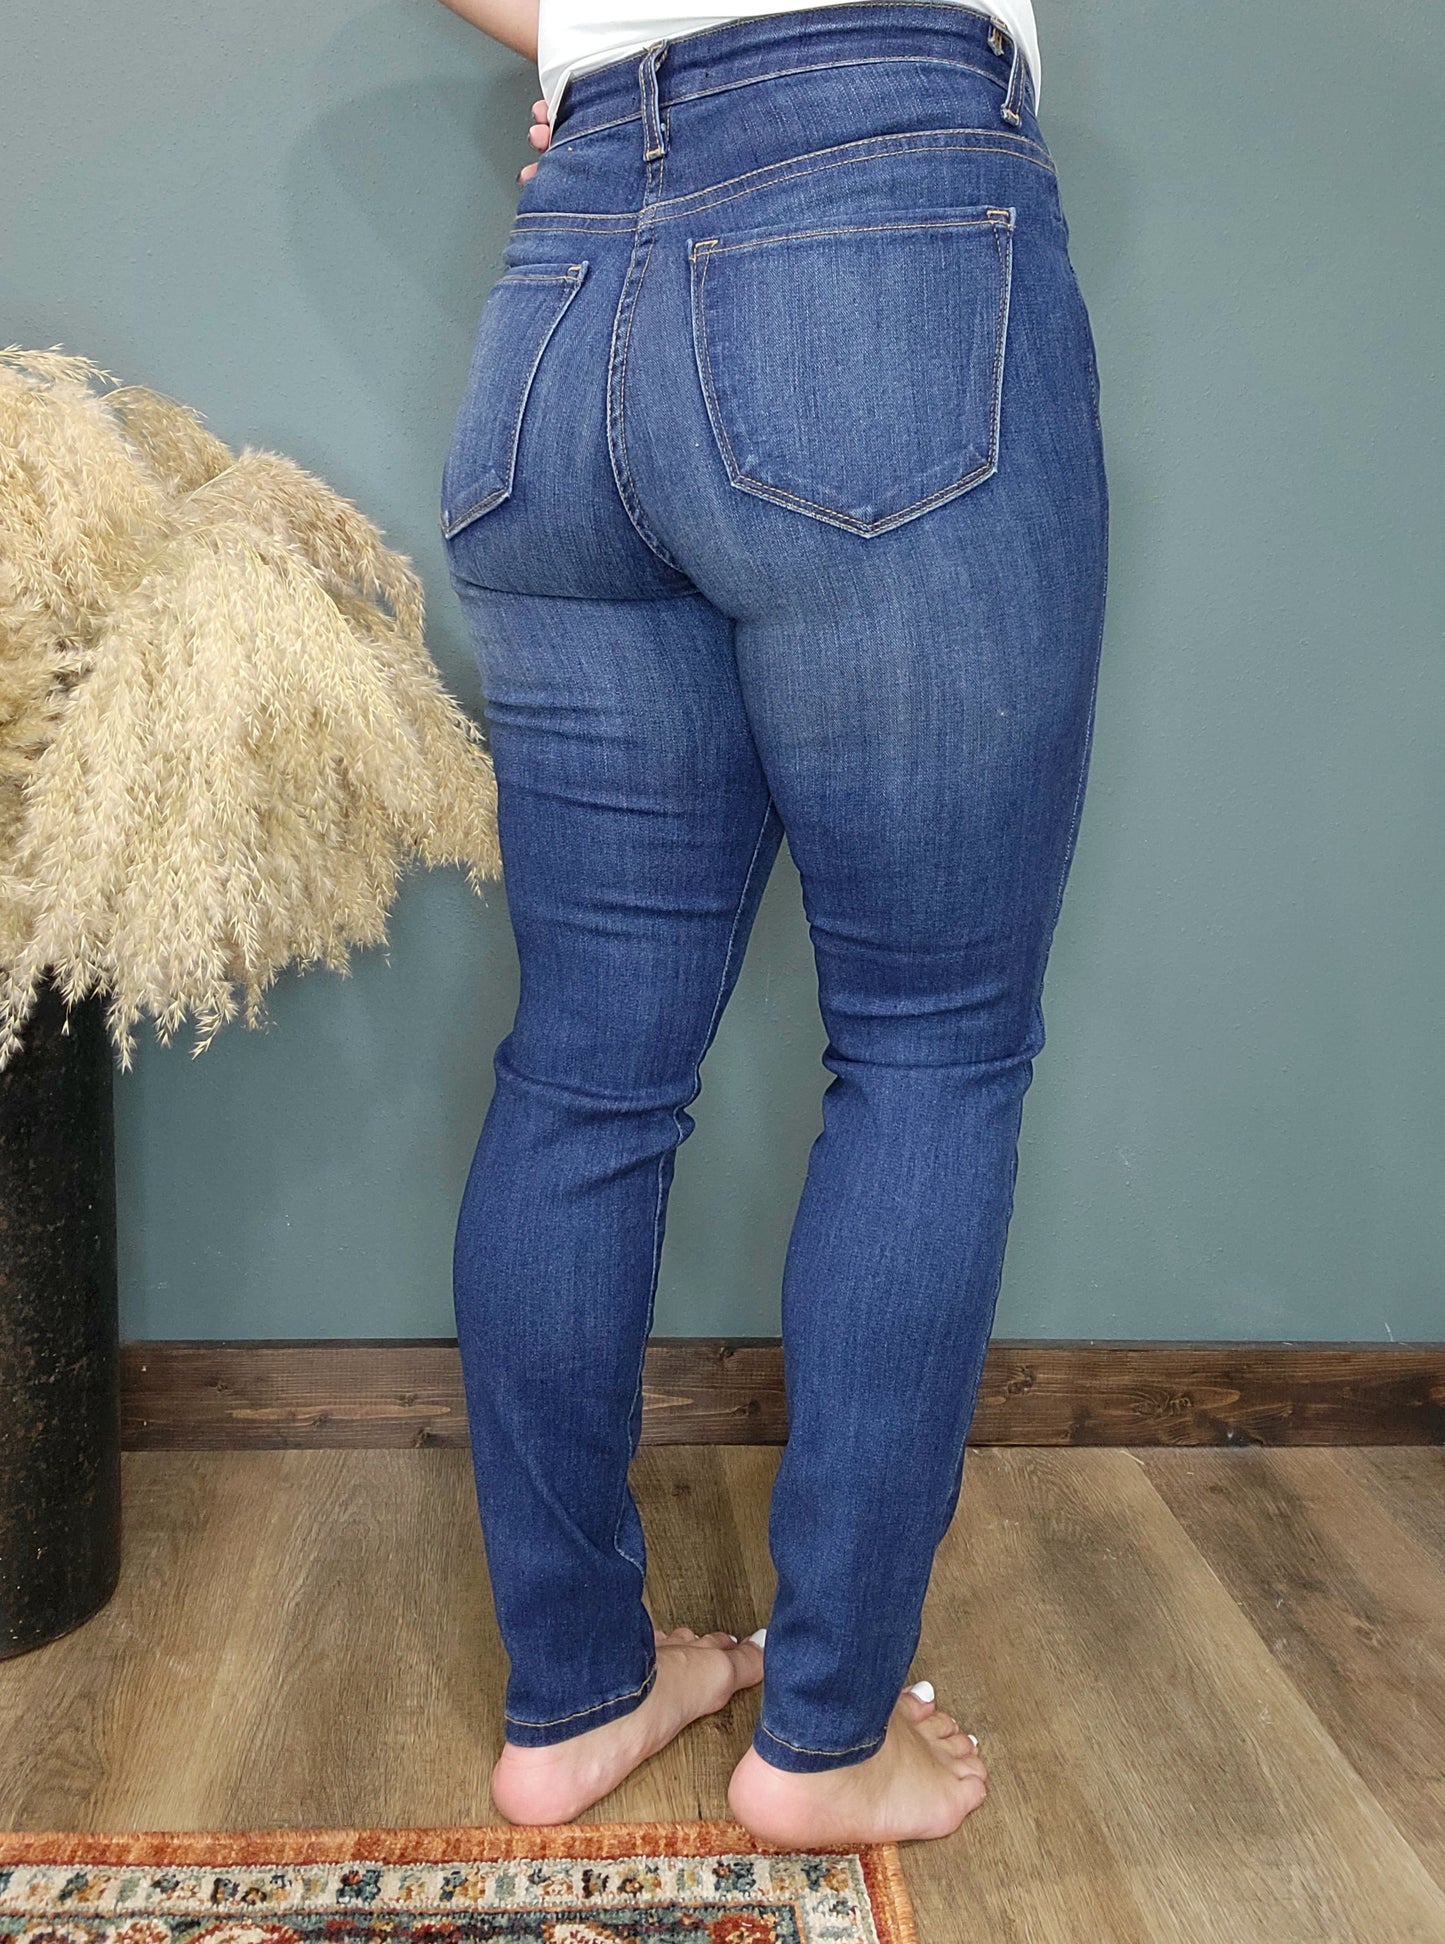 Judy Blue Medium Wash Handsand Relaxed Fit Jeans